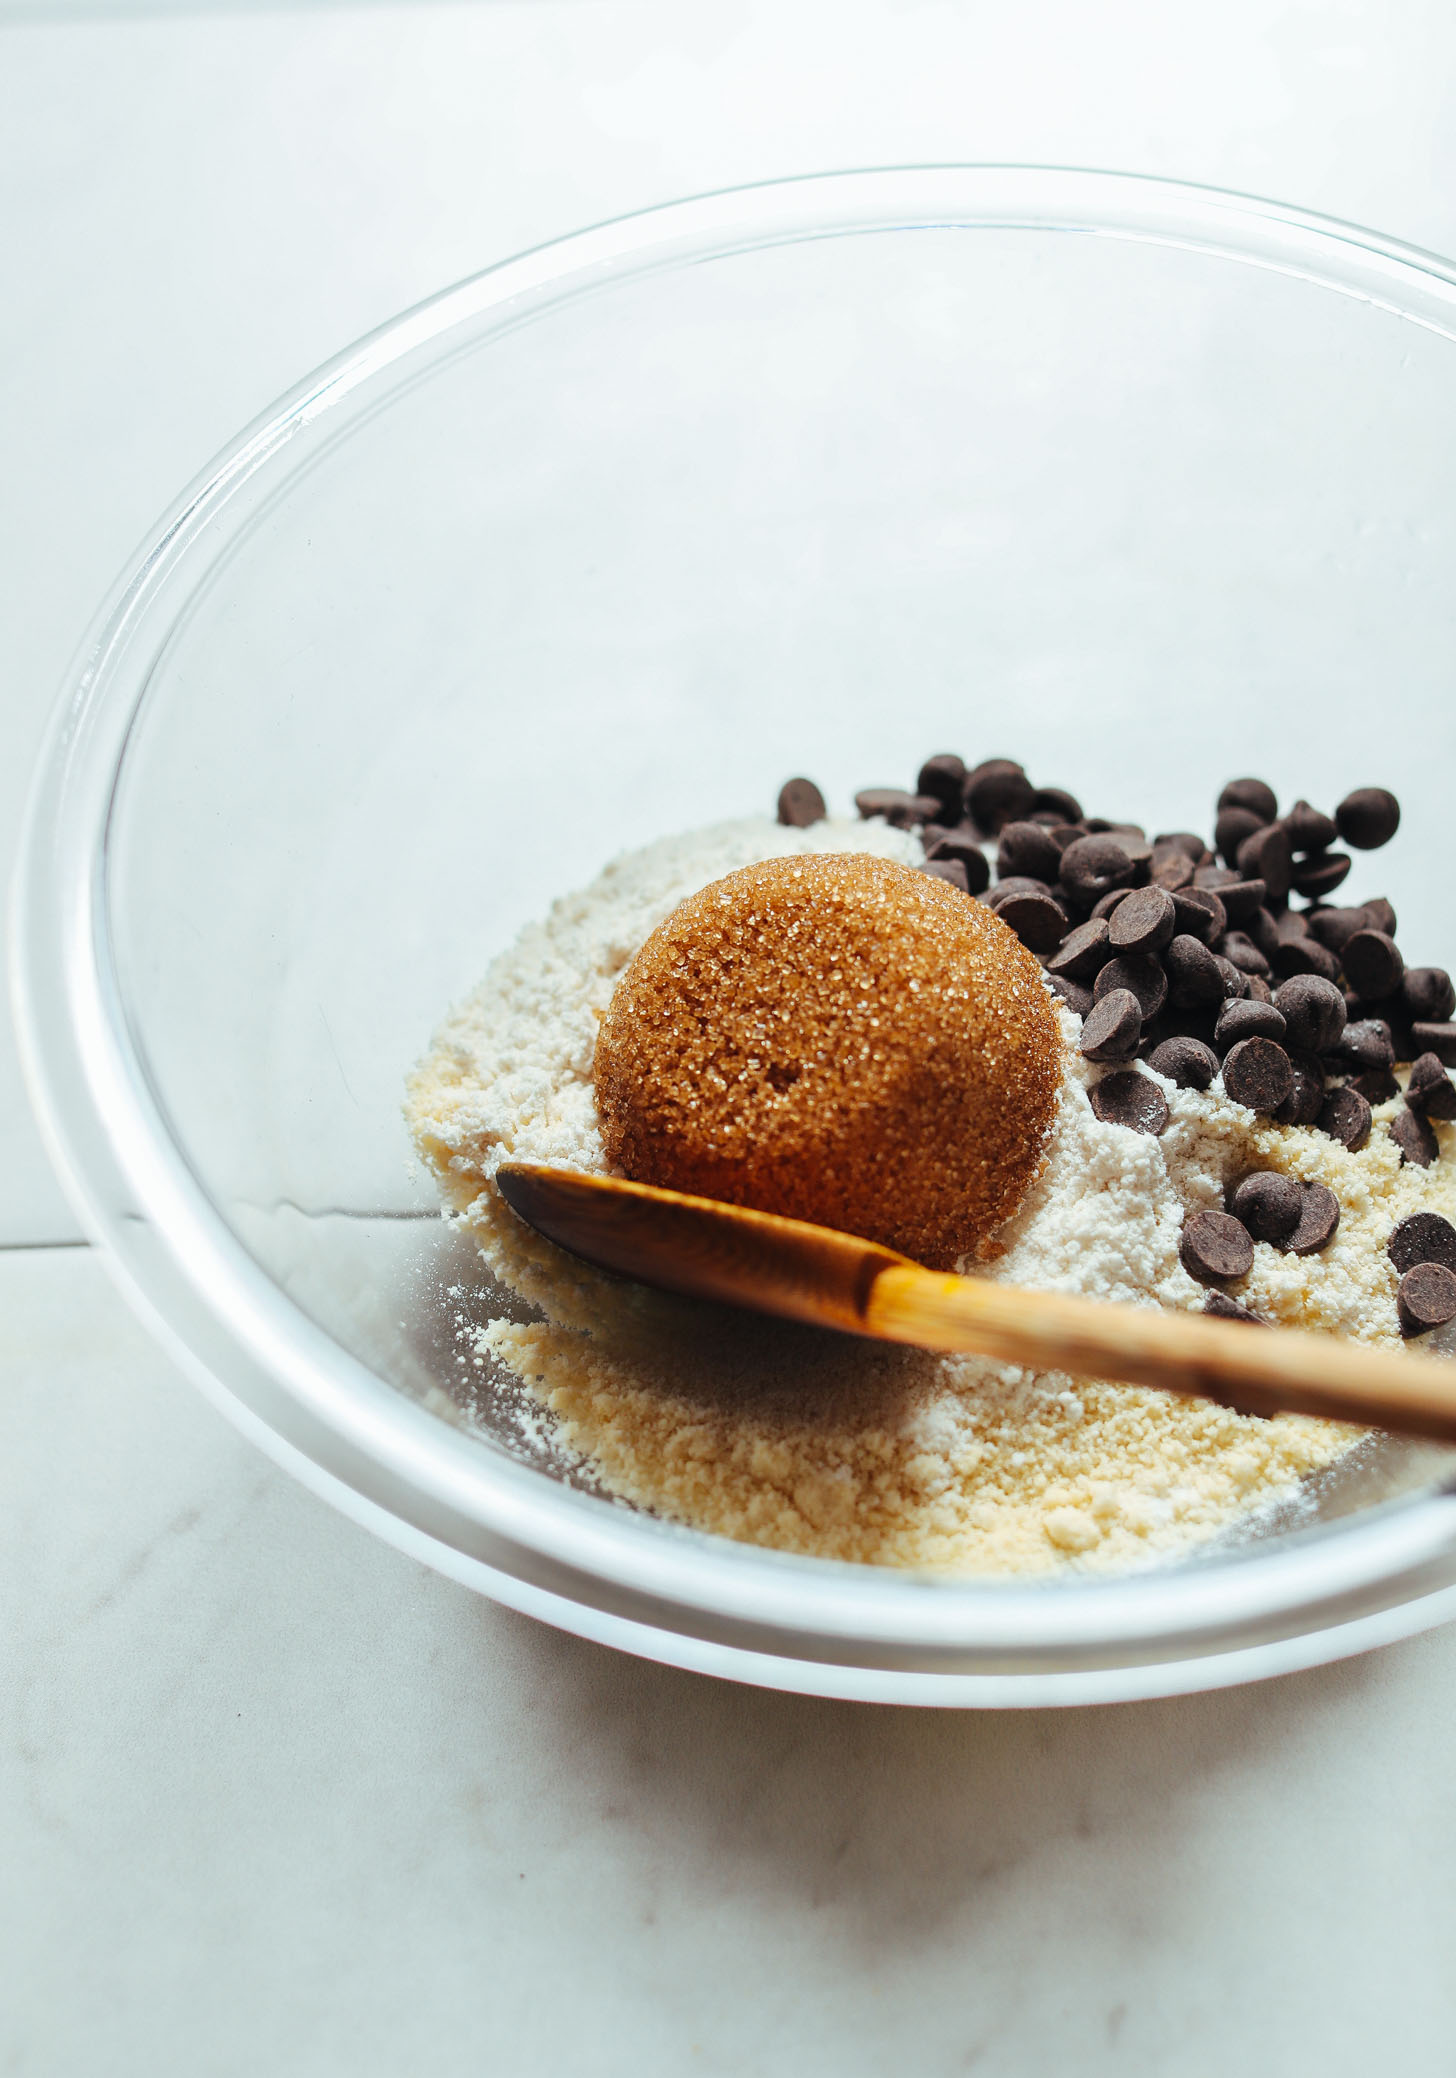 Bowl with dry ingredients for incredible gluten-free vegan chocolate chip cookies